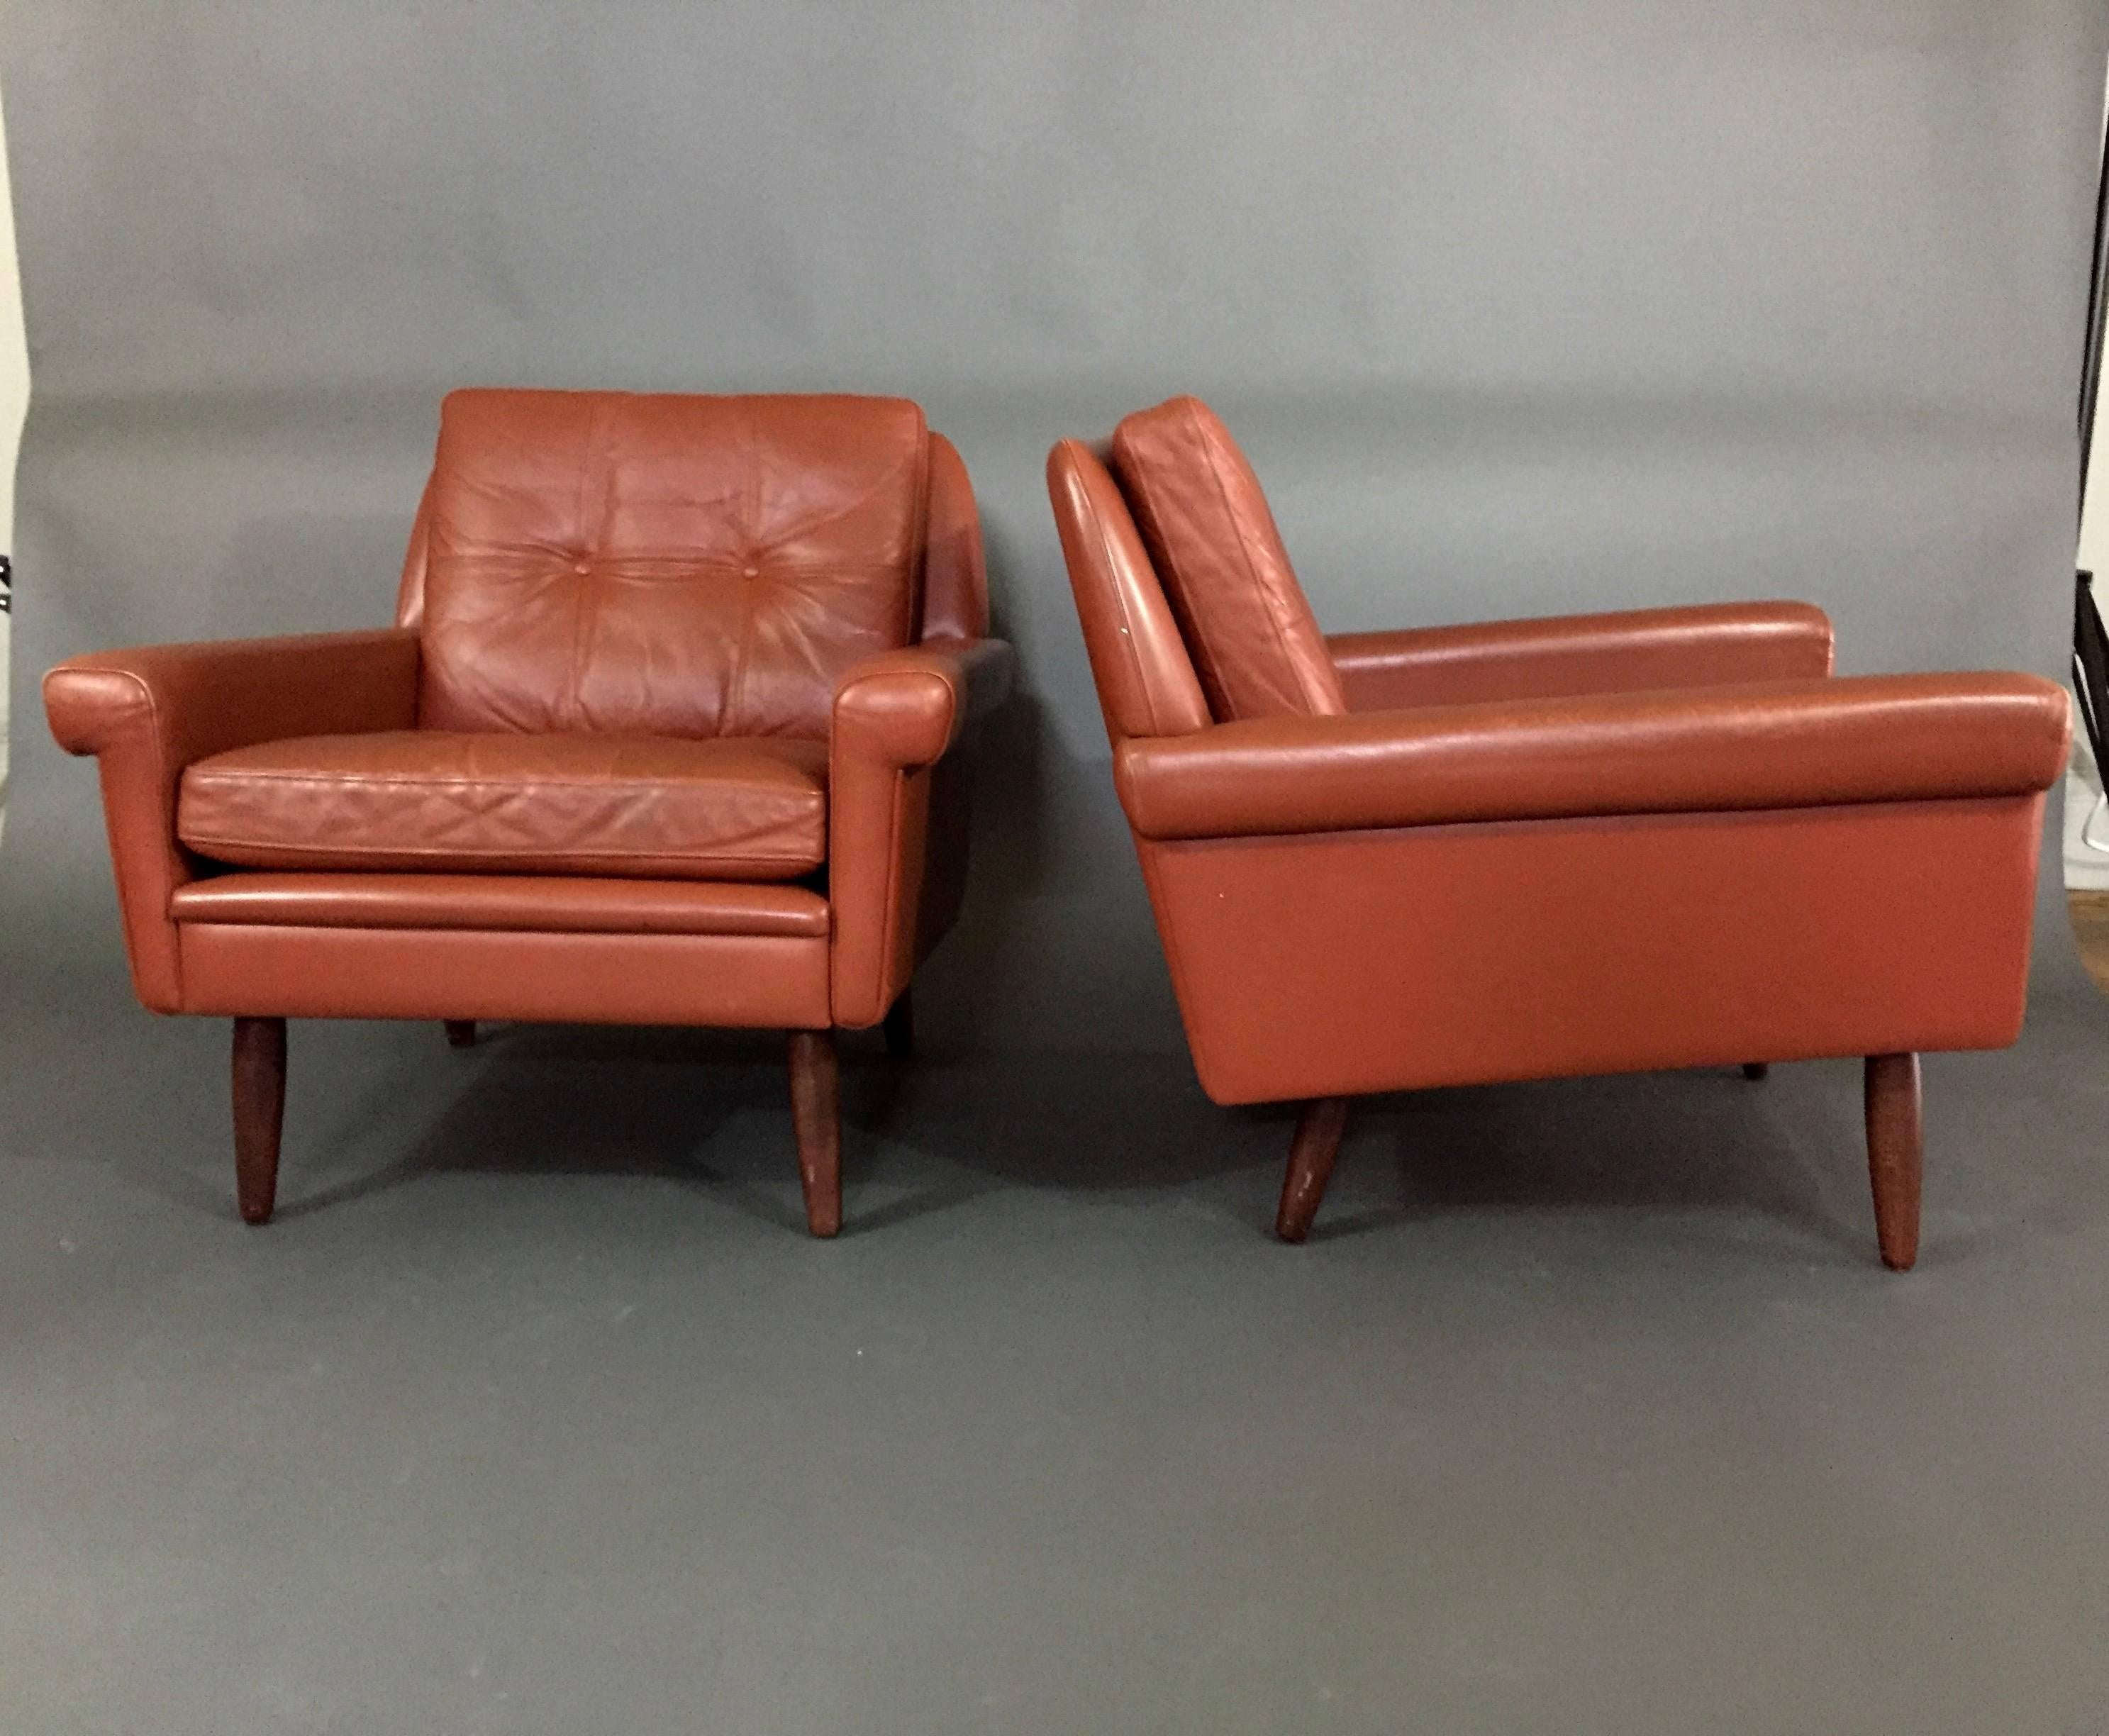 A classic pair of lounge chairs with beautifully squared arms and tampered back with two loose and buttoned cushions - all in a medium red/orange leather that speaks perfectly to era in which they were created. Danish producer - 1960s.  Similar to